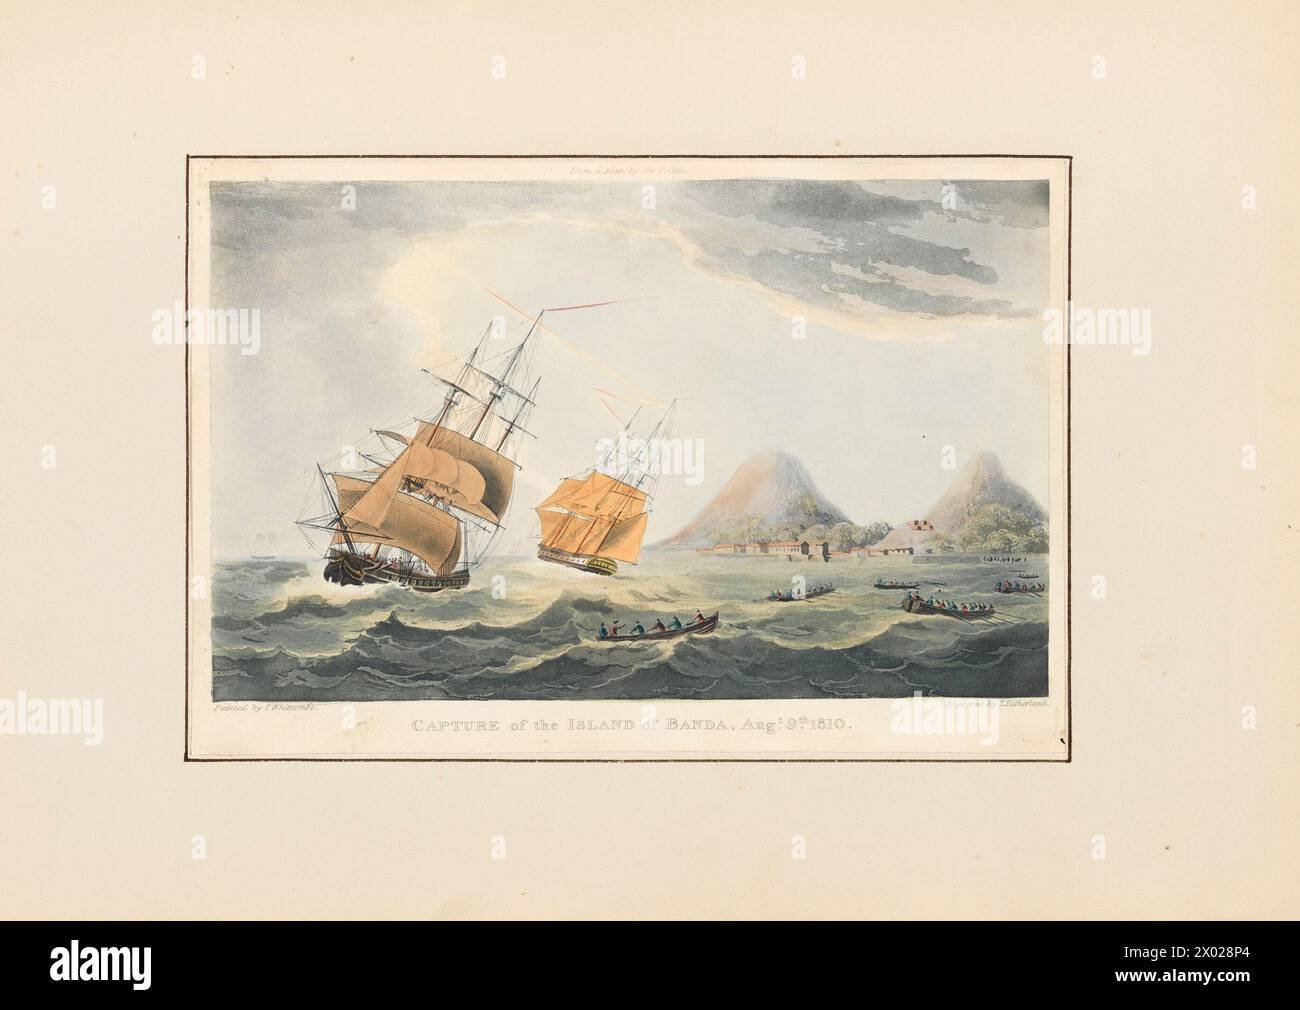 Vintage British Naval Military art:   Capture of the Island of Banda, August 8, 1810.   From The Naval Achievements of Great Britain from the Year 1793 to 1817. Stock Photo